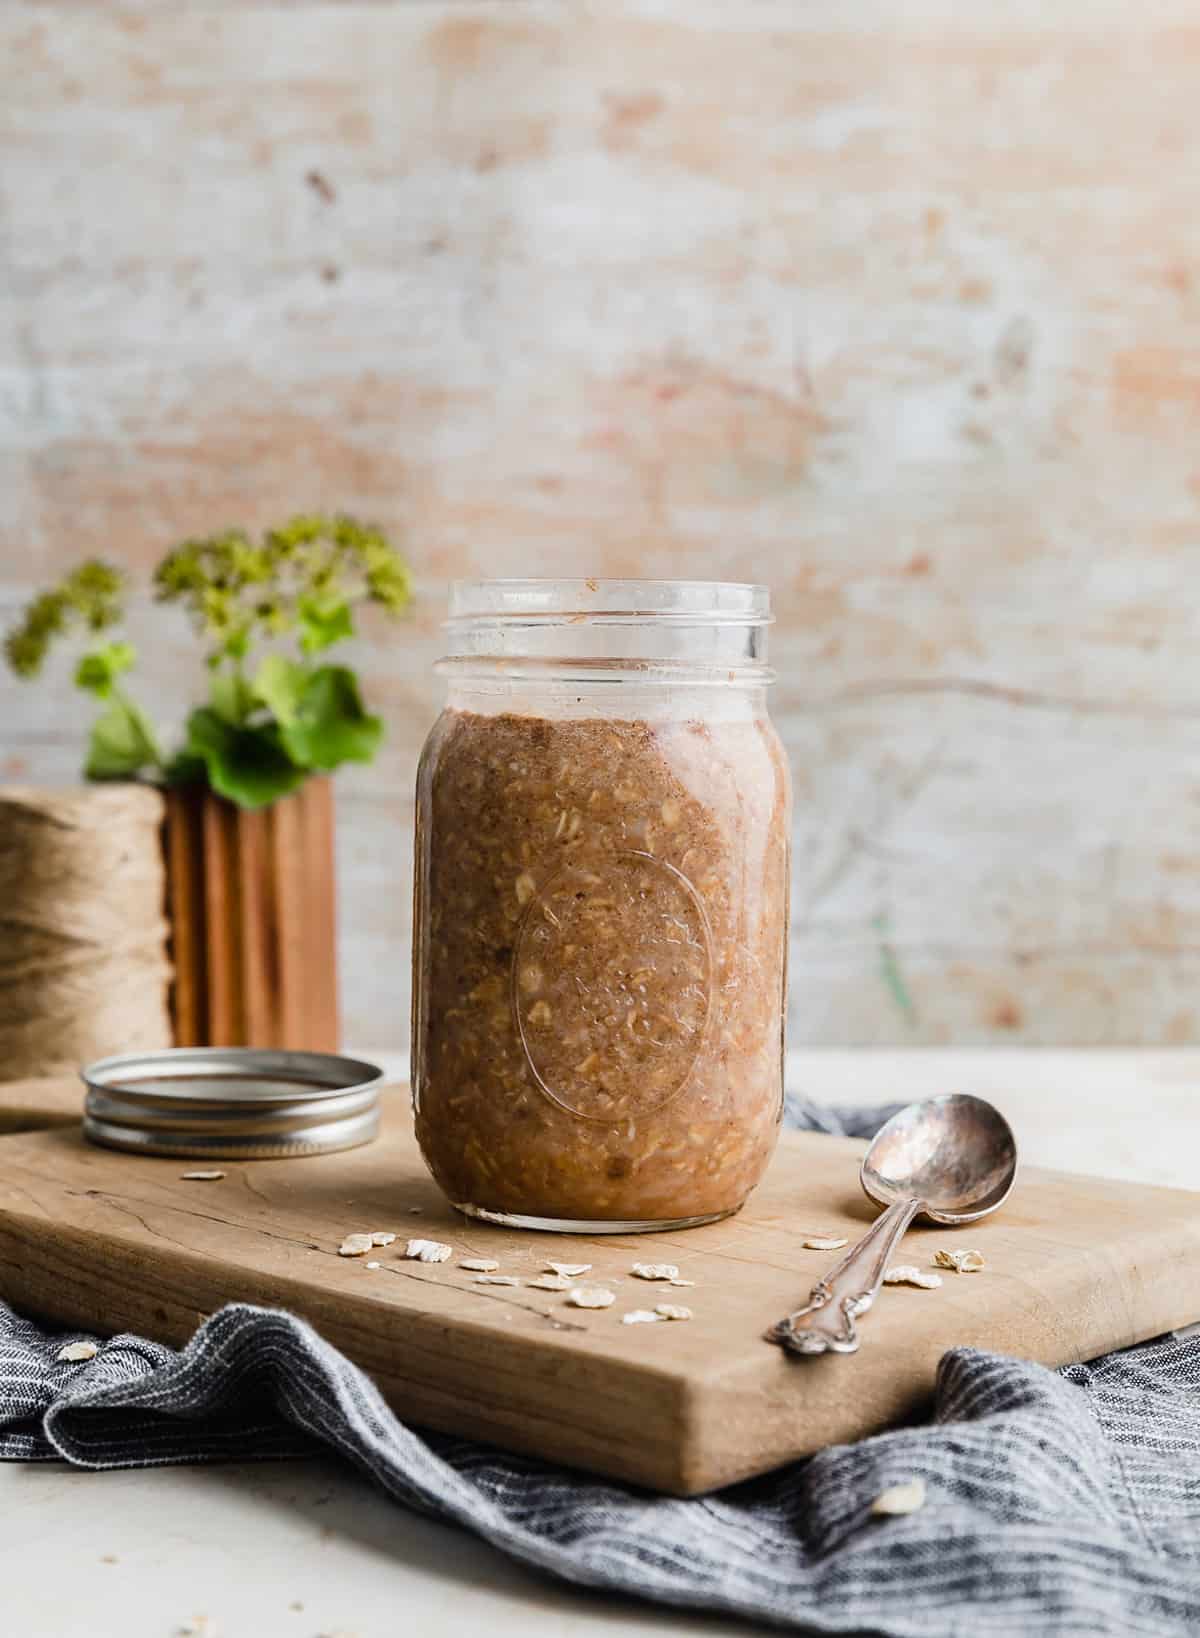 High Protein Overnight Oats in a glass jar on a light brown cutting board.